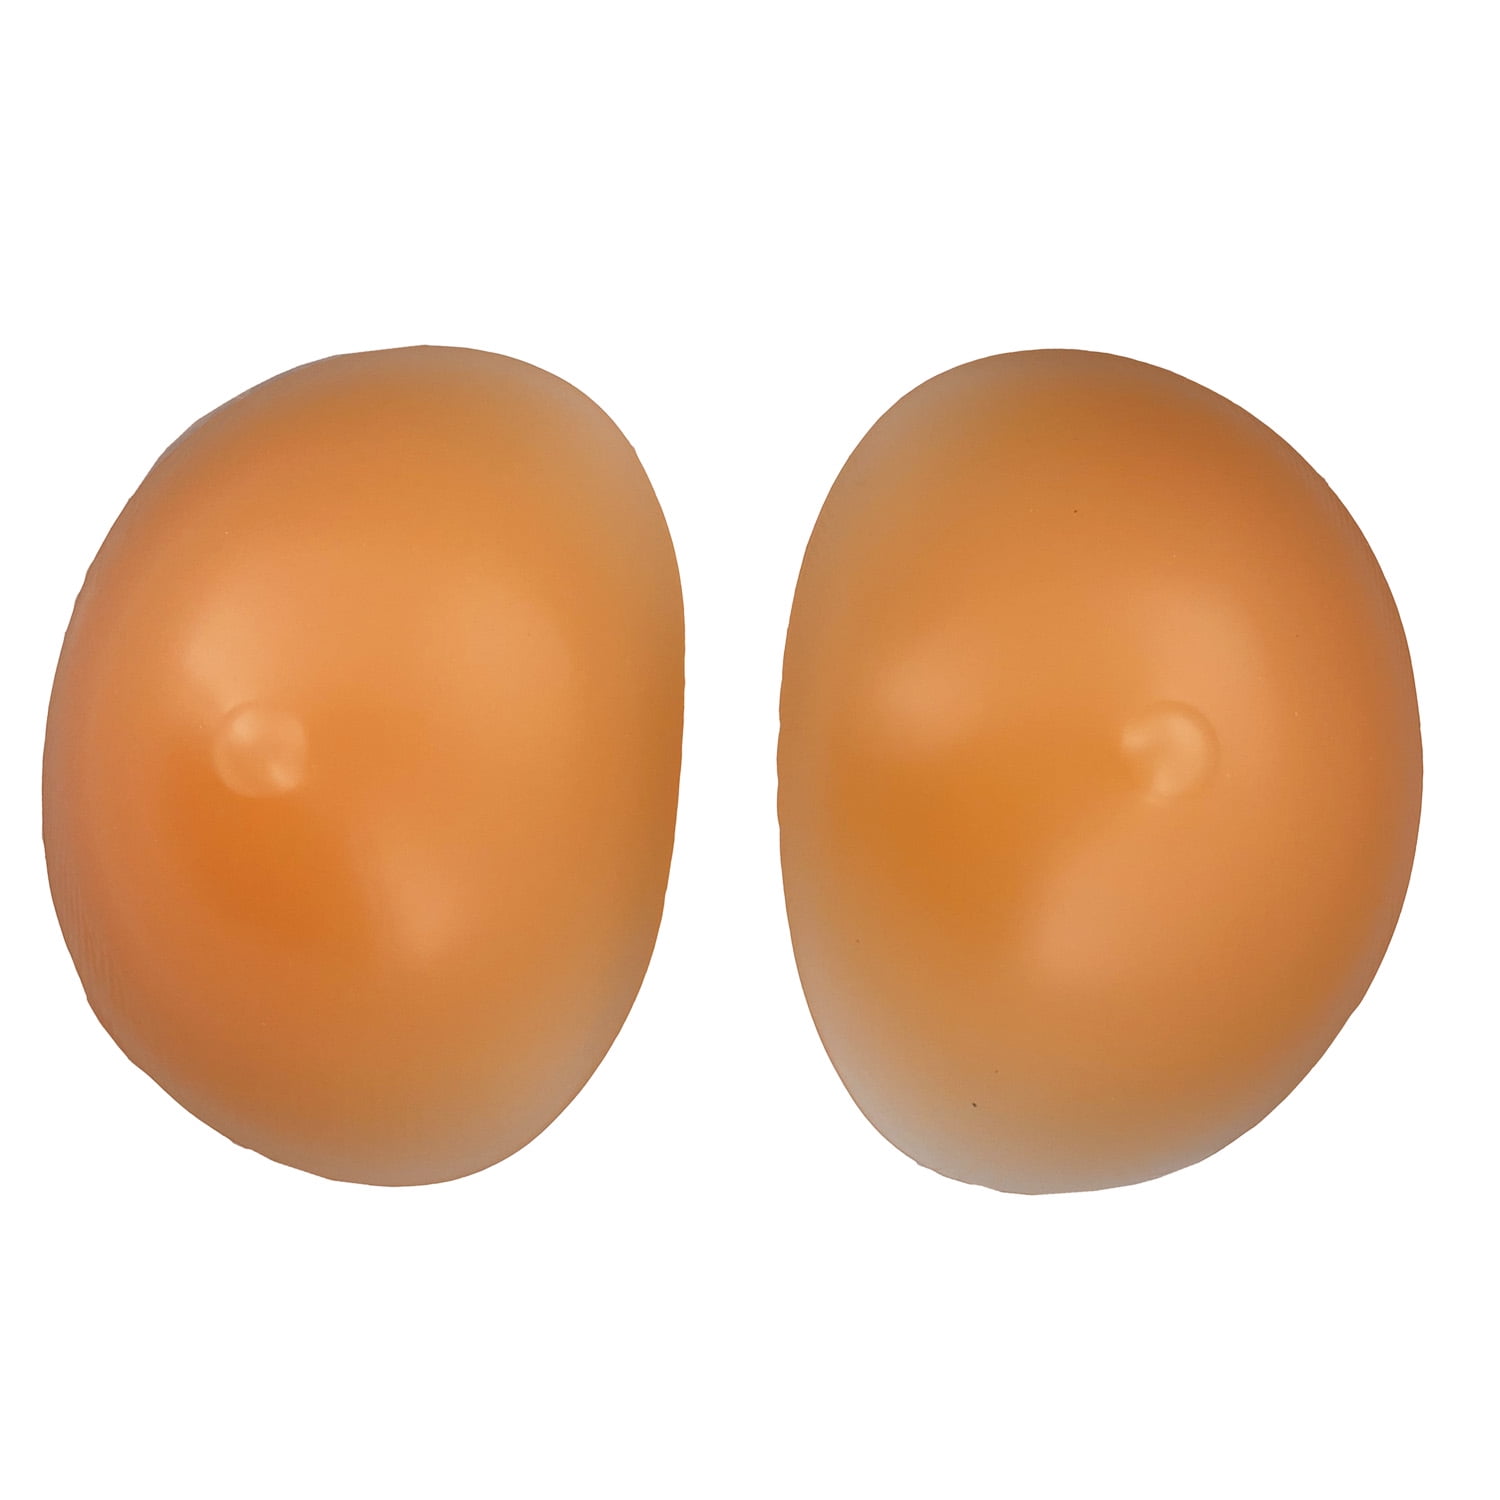 Boobs in a Box -Silicone Breast Enhancer Inserts for Women Bras